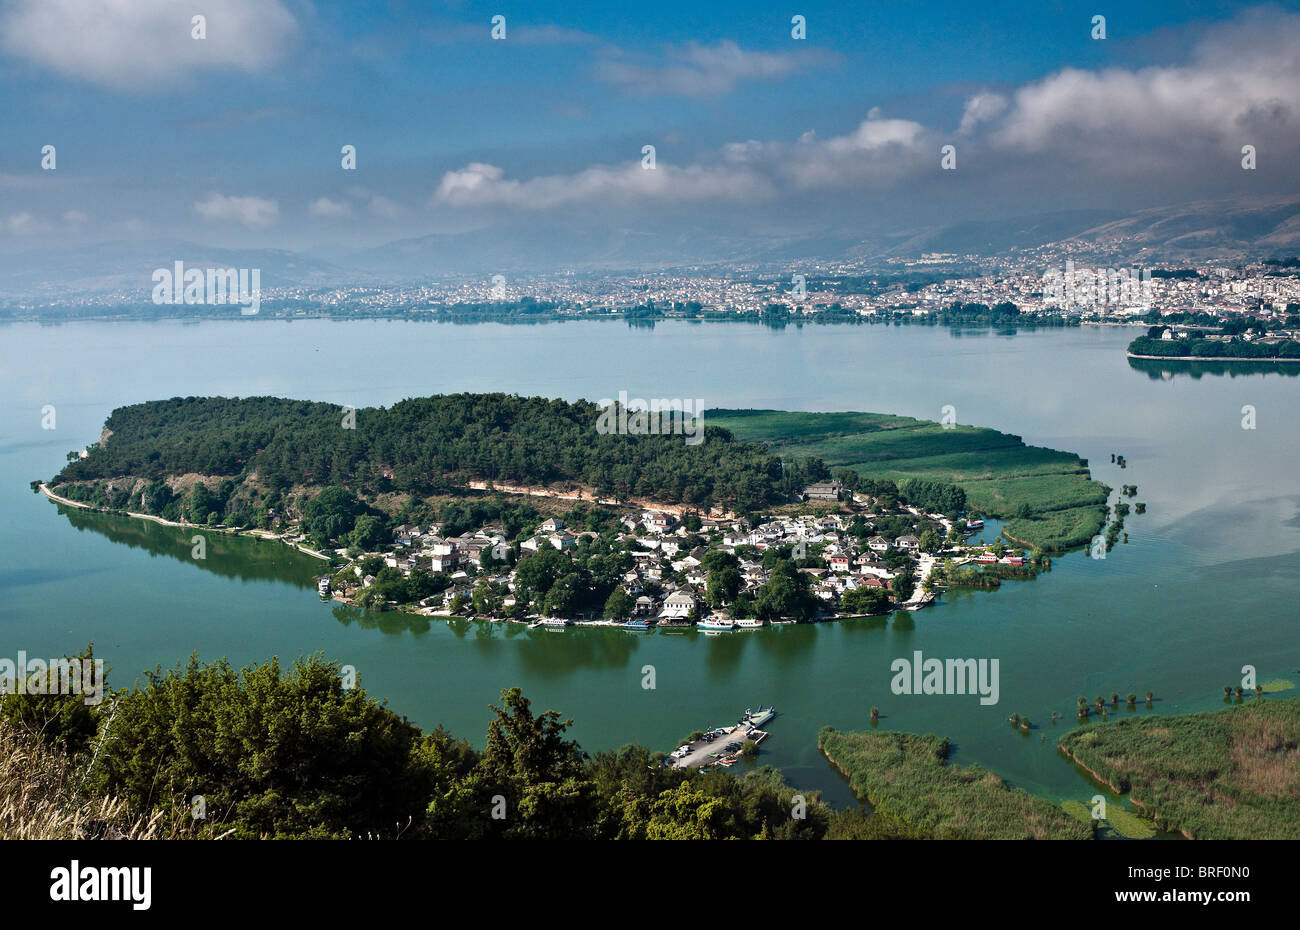 Looking across the Island of Nissi, on Lake Pamvotidha with the city of Ioannina in the background, Epirus, northern Greece. Stock Photo